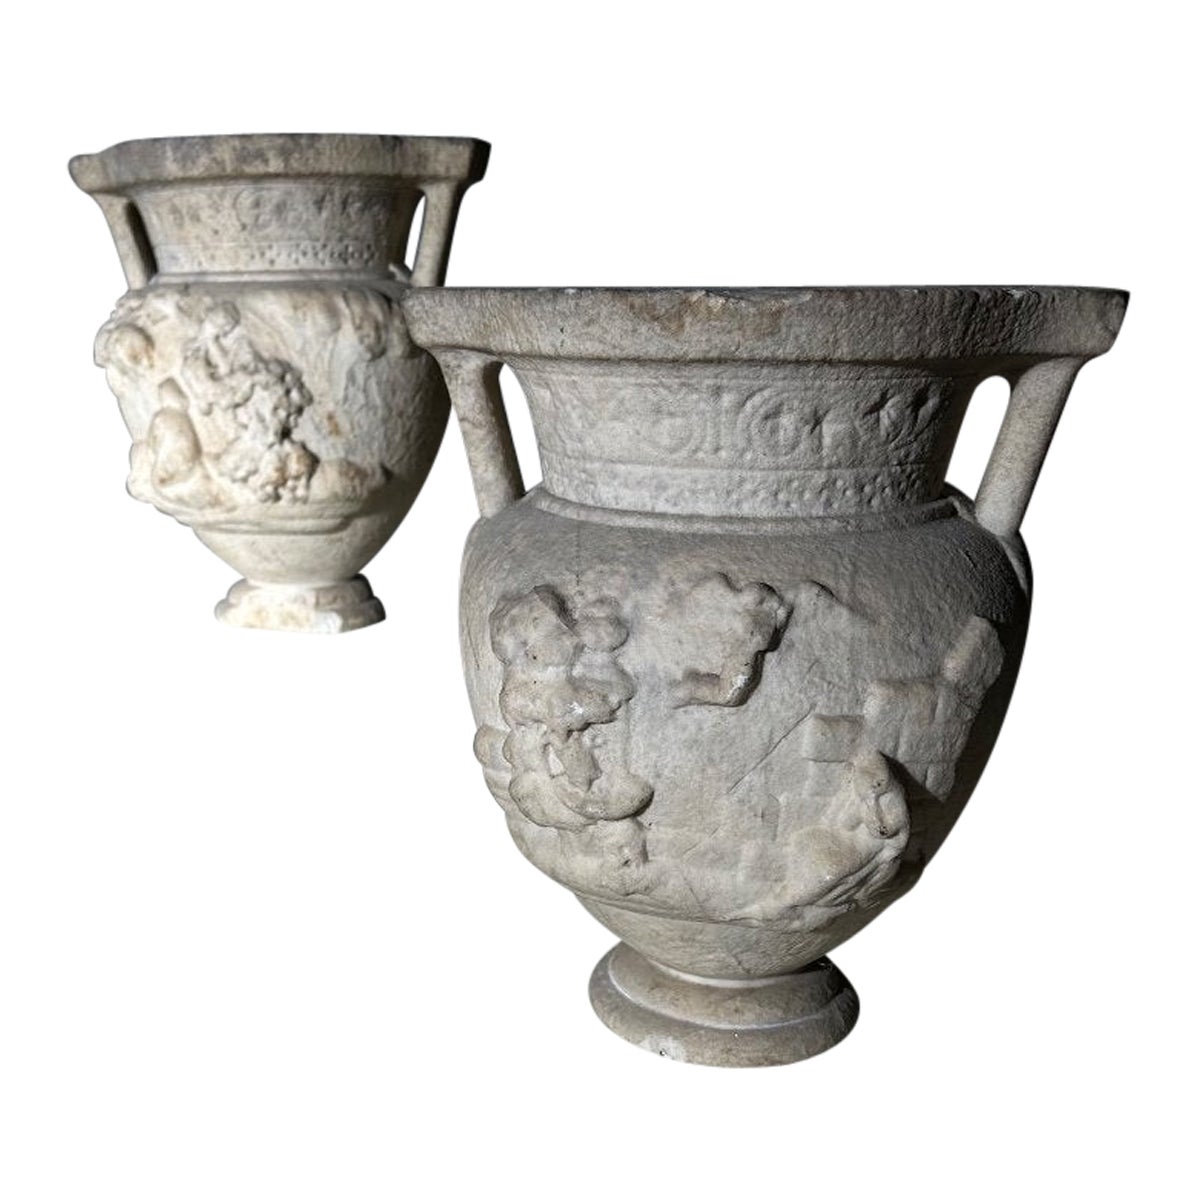 Pair of neoclassical marble vases, late 18th century early 19th century